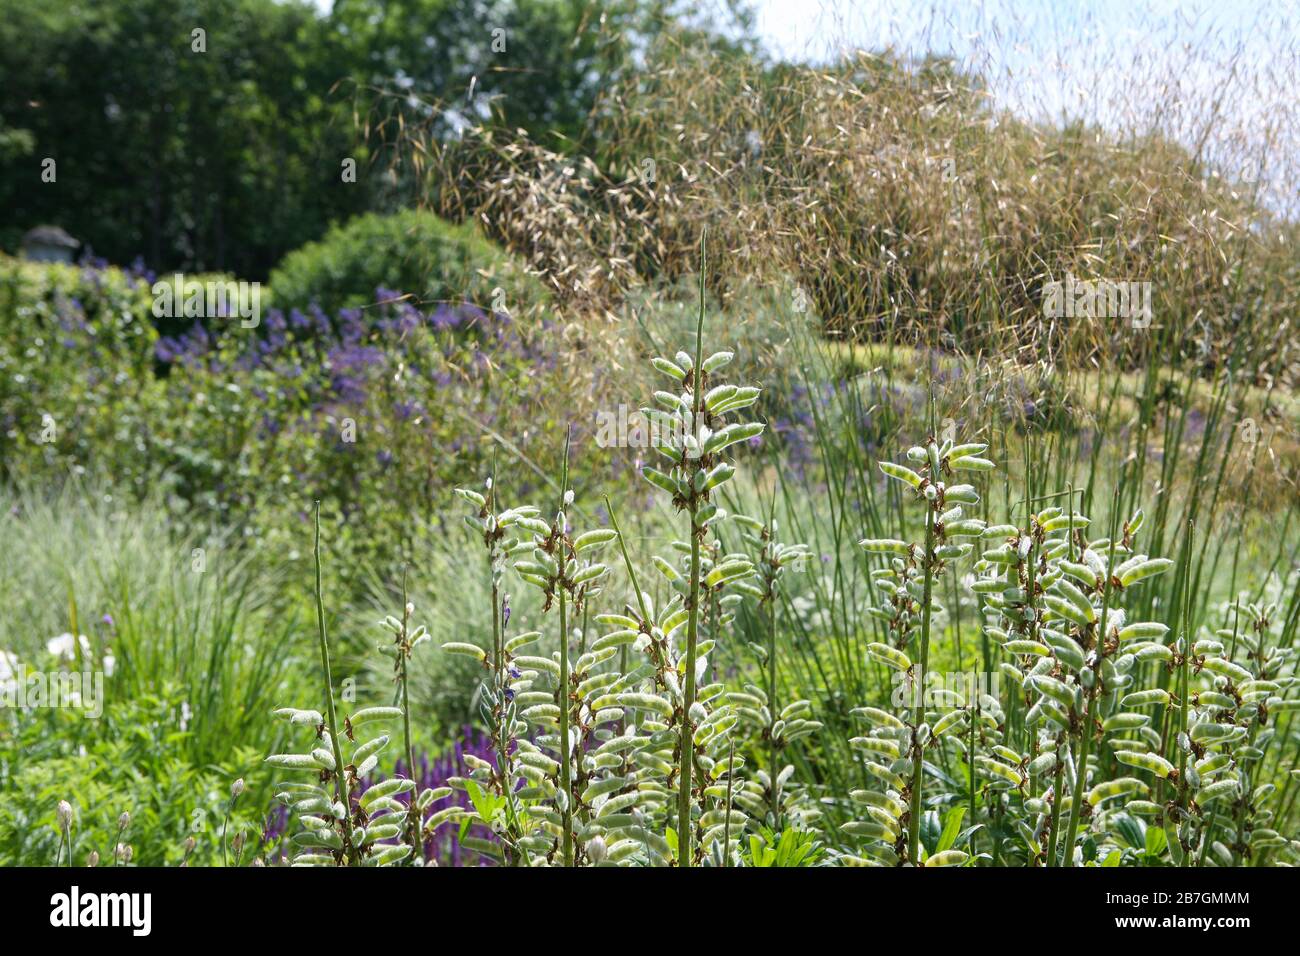 Lupinus seedheads against flowering Stipa gigantea in a lila and White herbaceous border Stockfoto